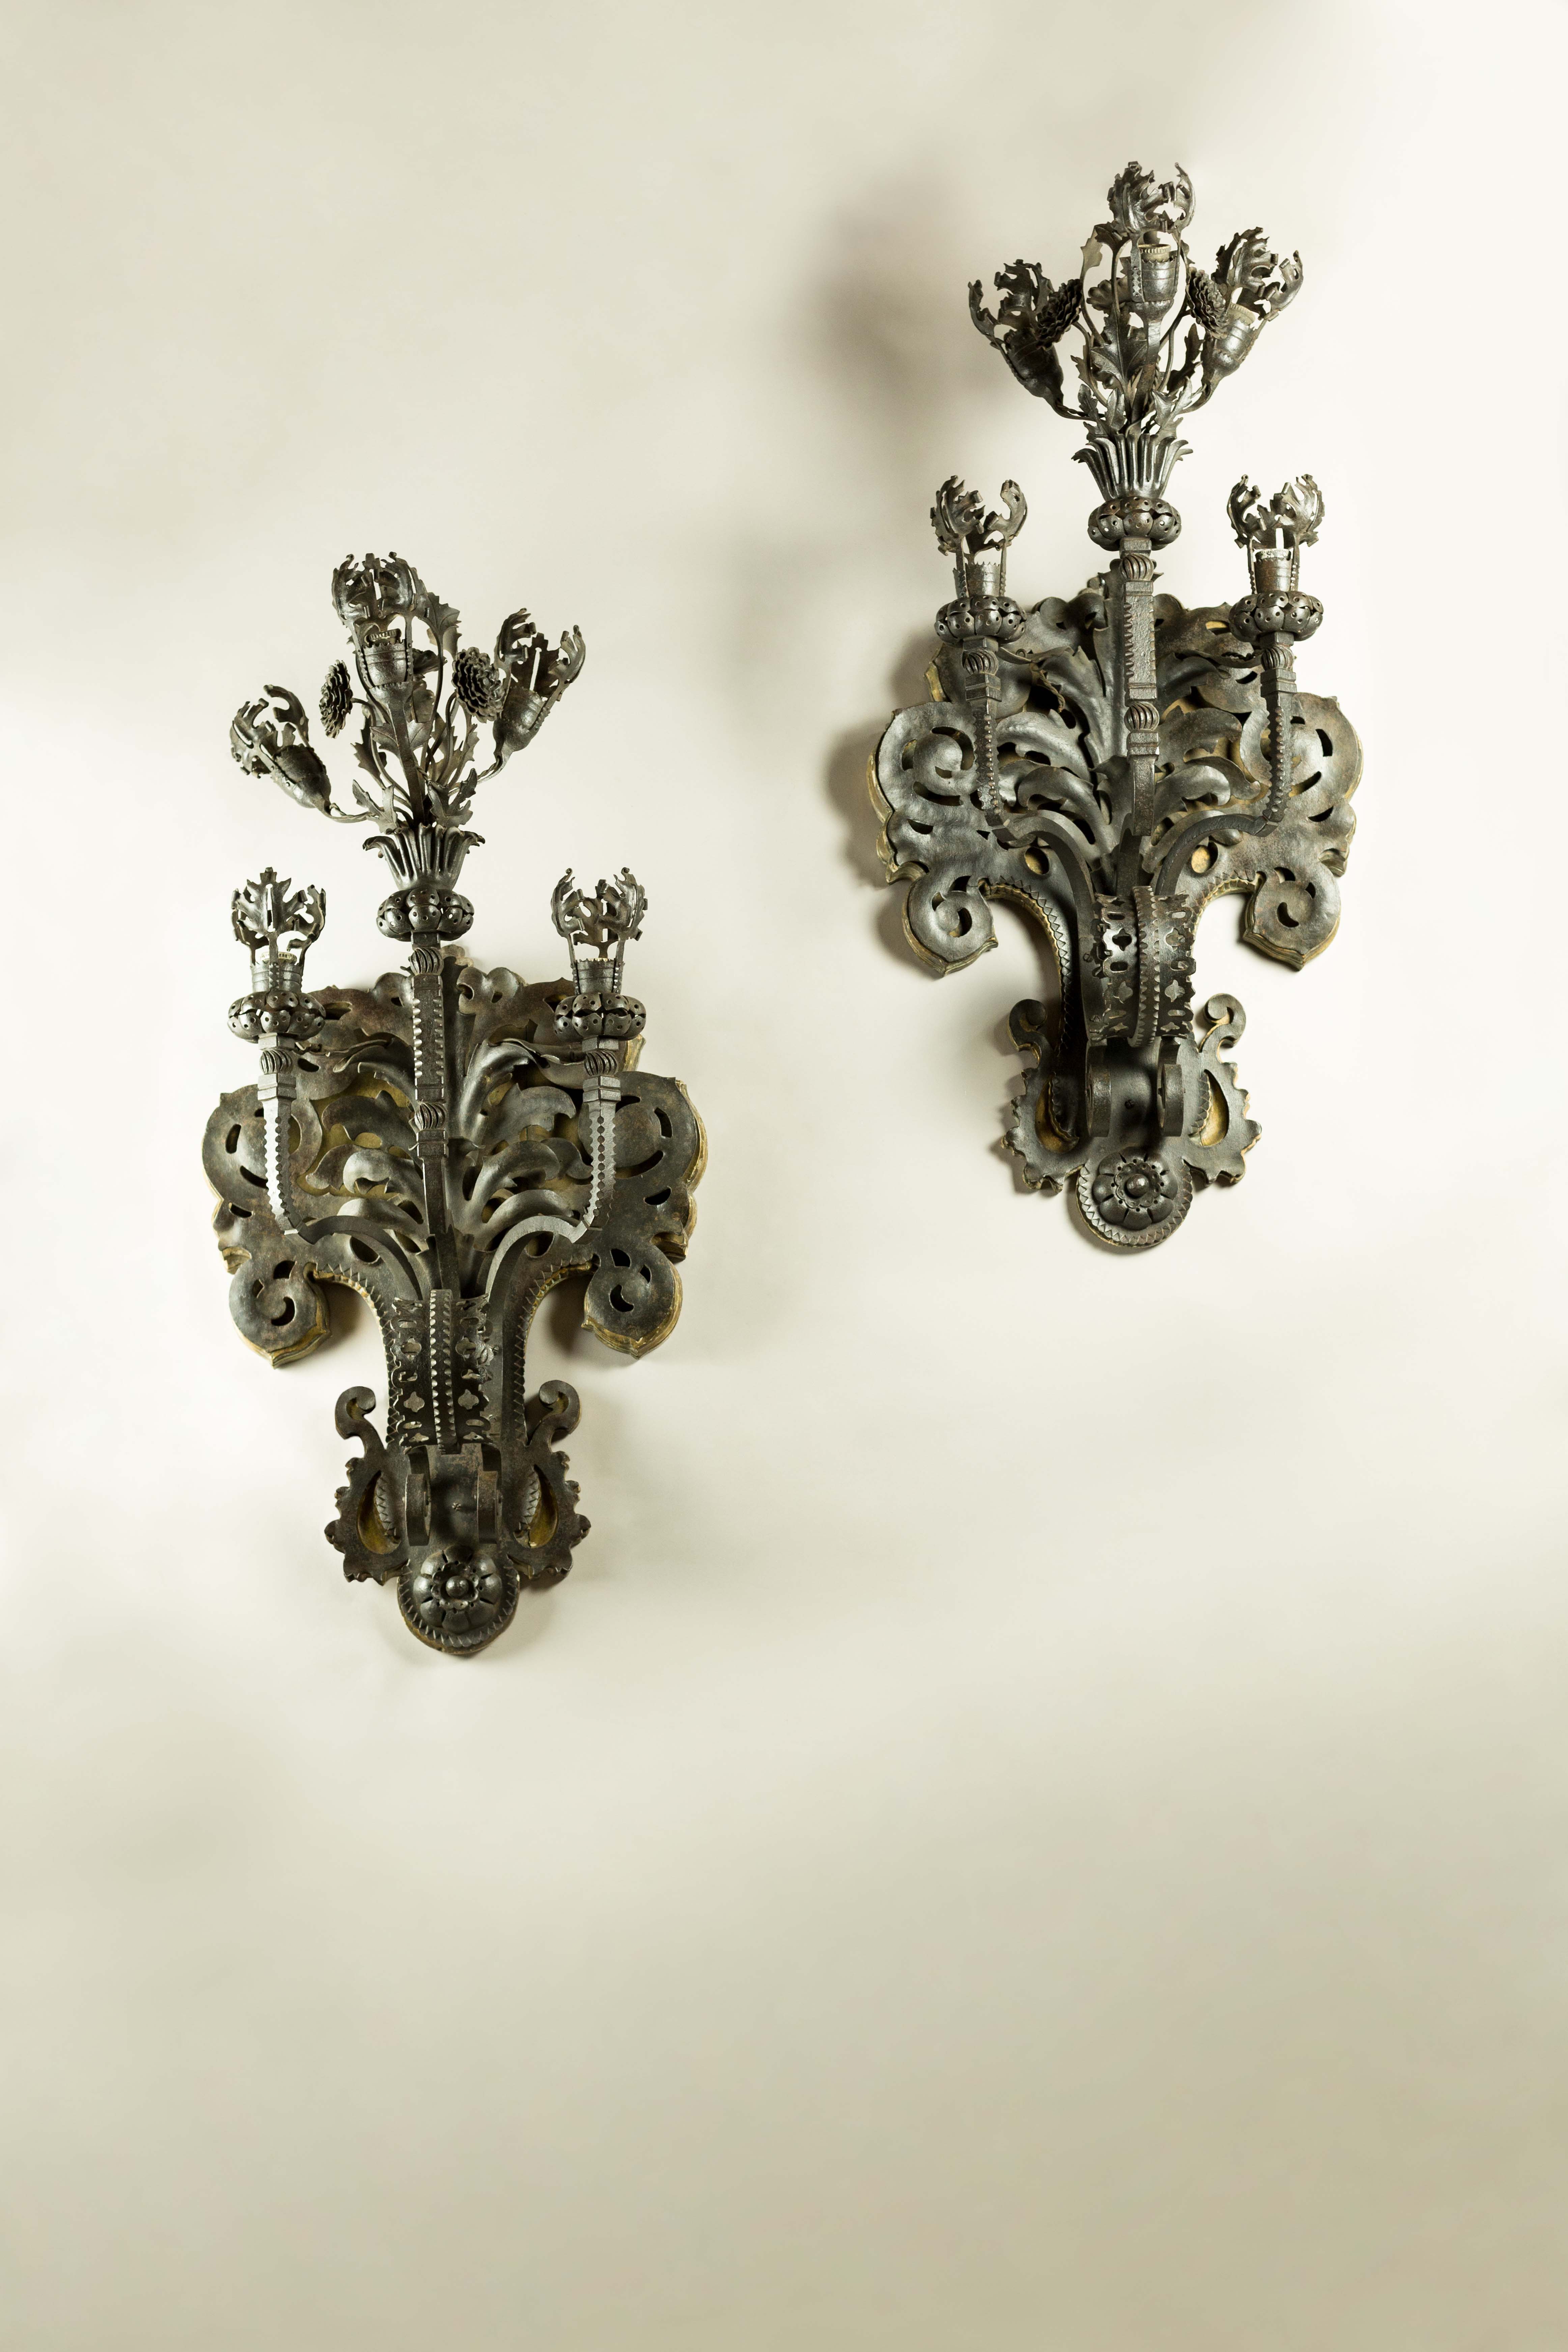 Huge pair of appliques by Mazzucotelli